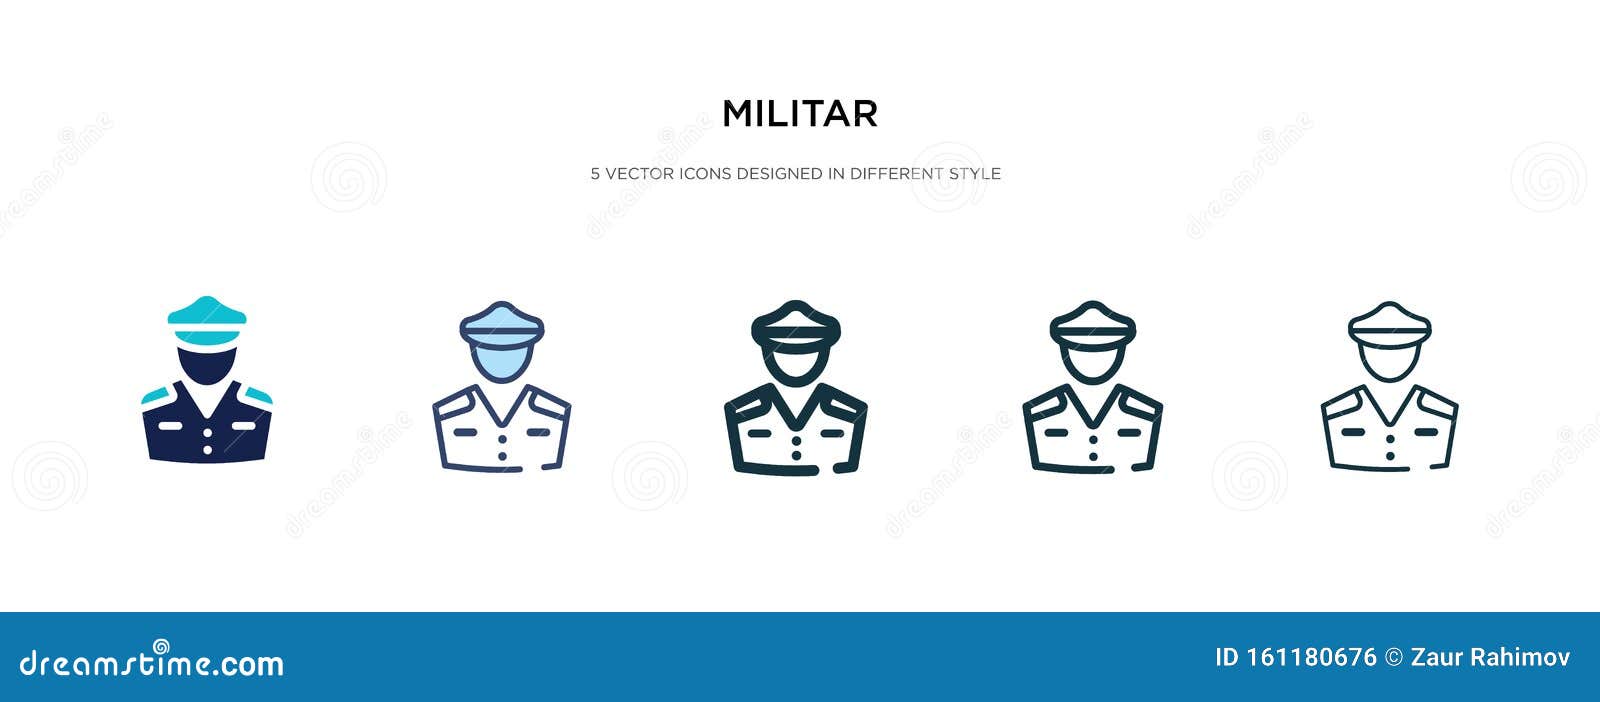 militar icon in different style  . two colored and black militar  icons ed in filled, outline, line